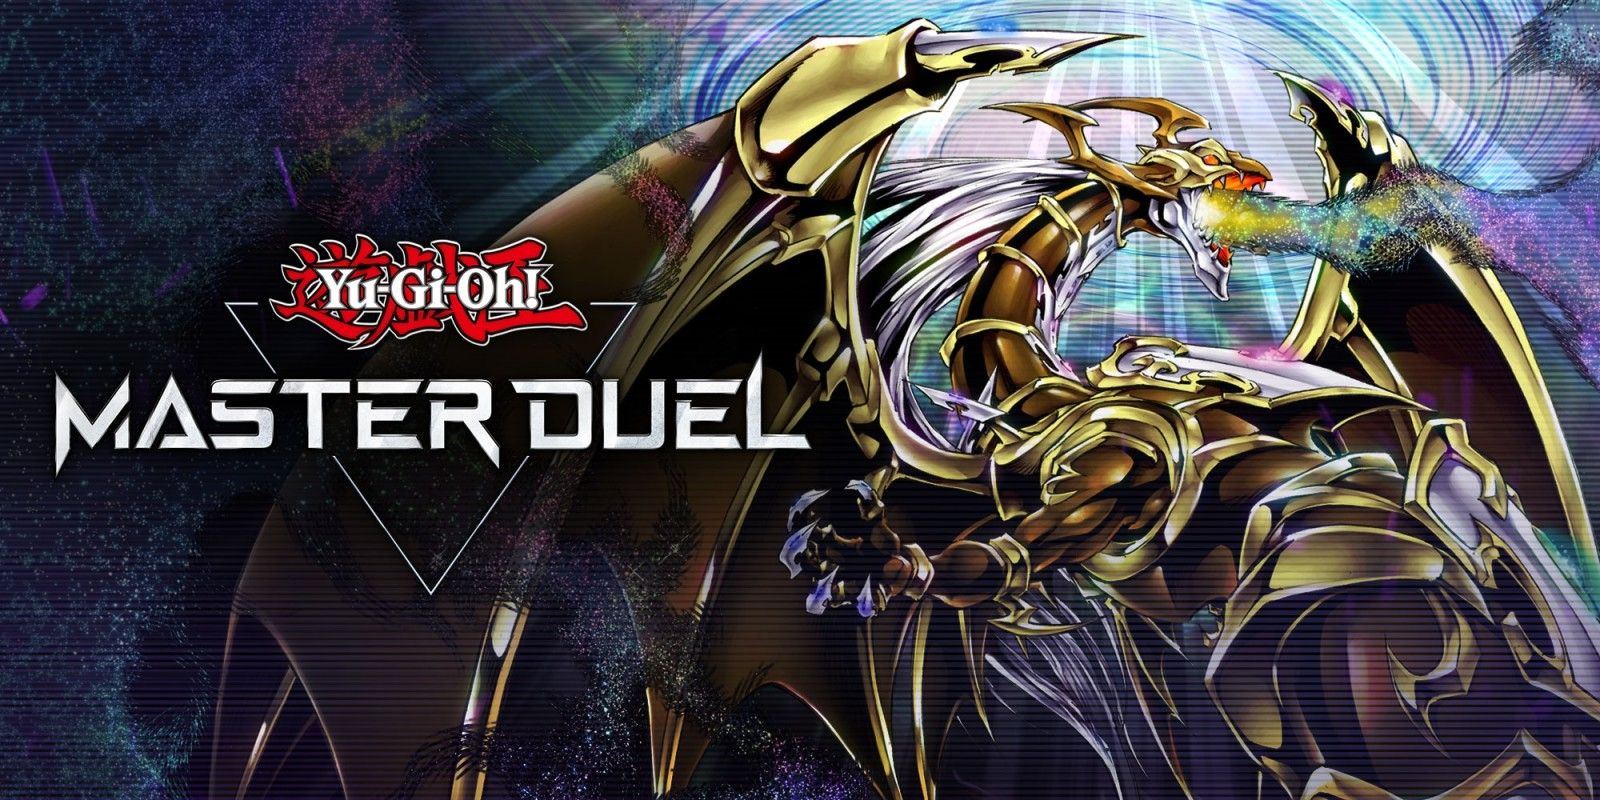 The Yu-Gi-Oh! Master Duel logo, featuring a golden dragon